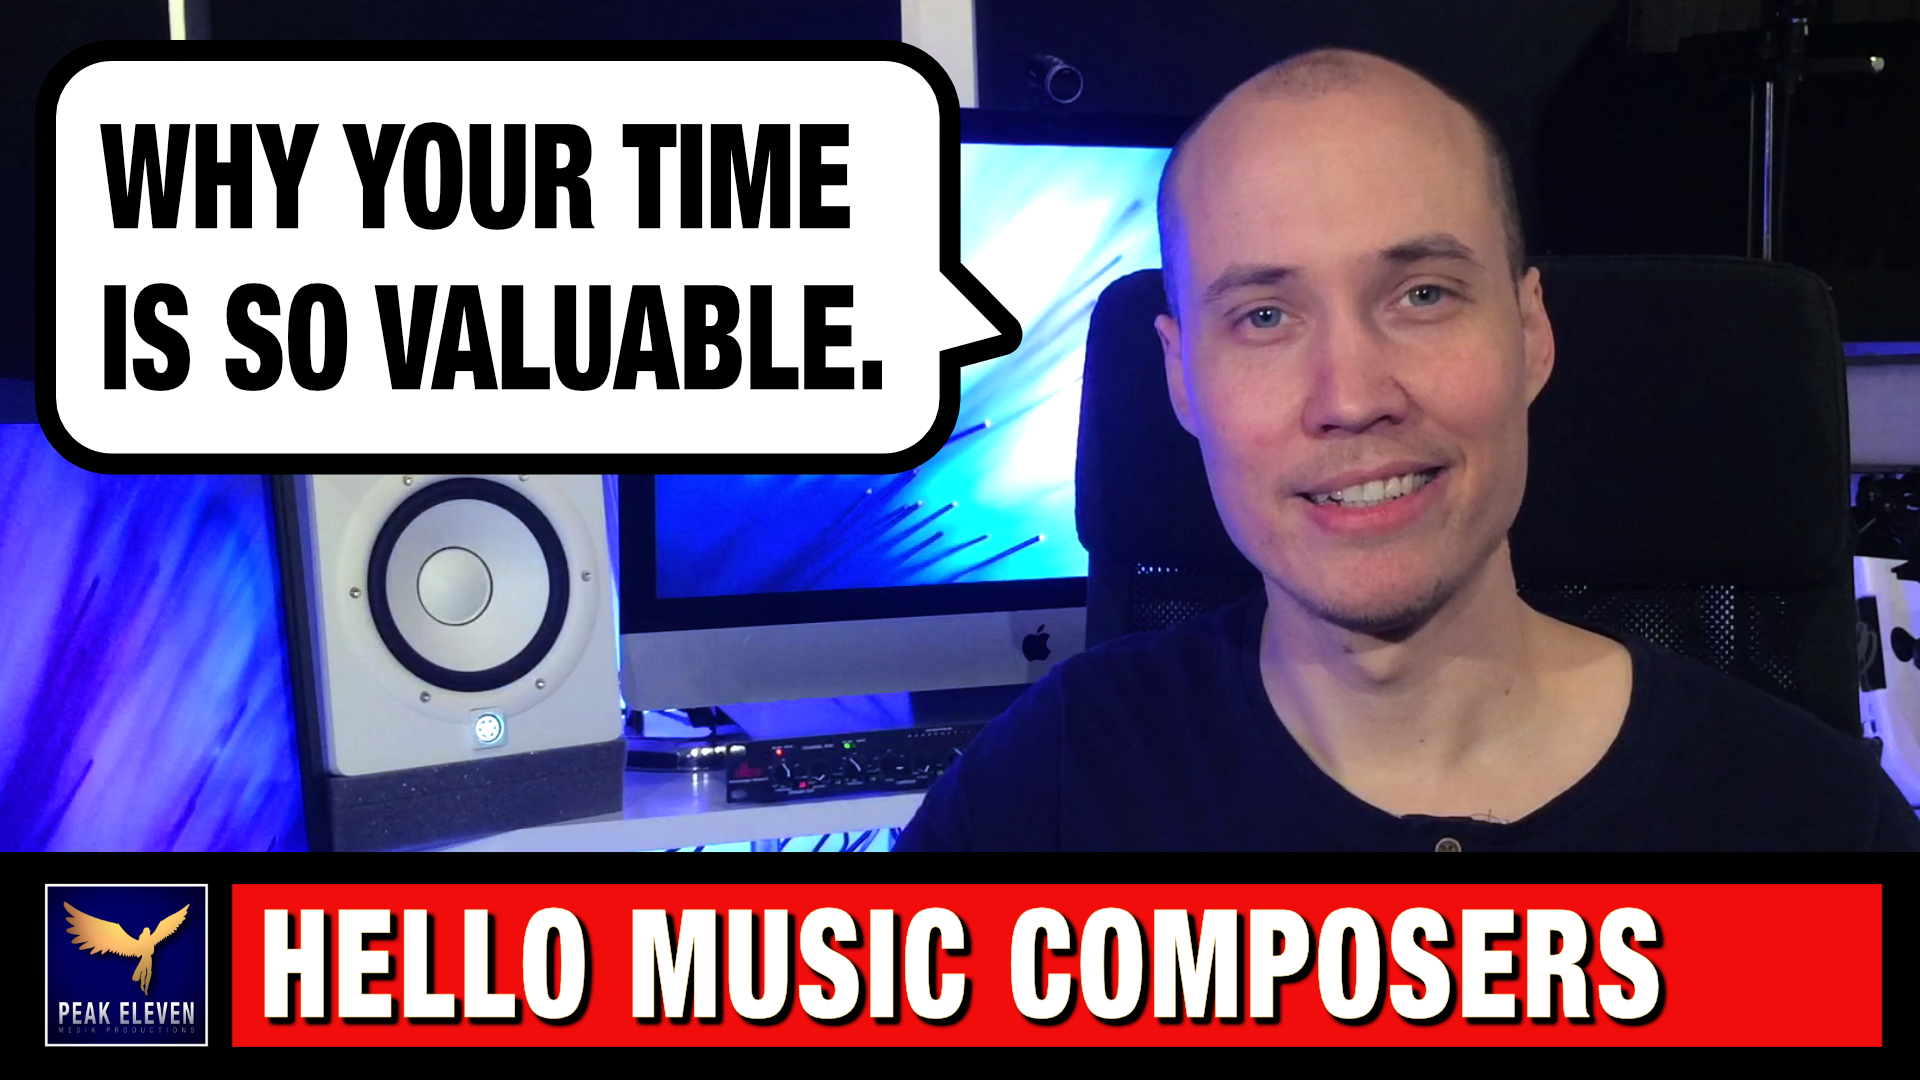 Music Composers - Why your Time is so Valuable